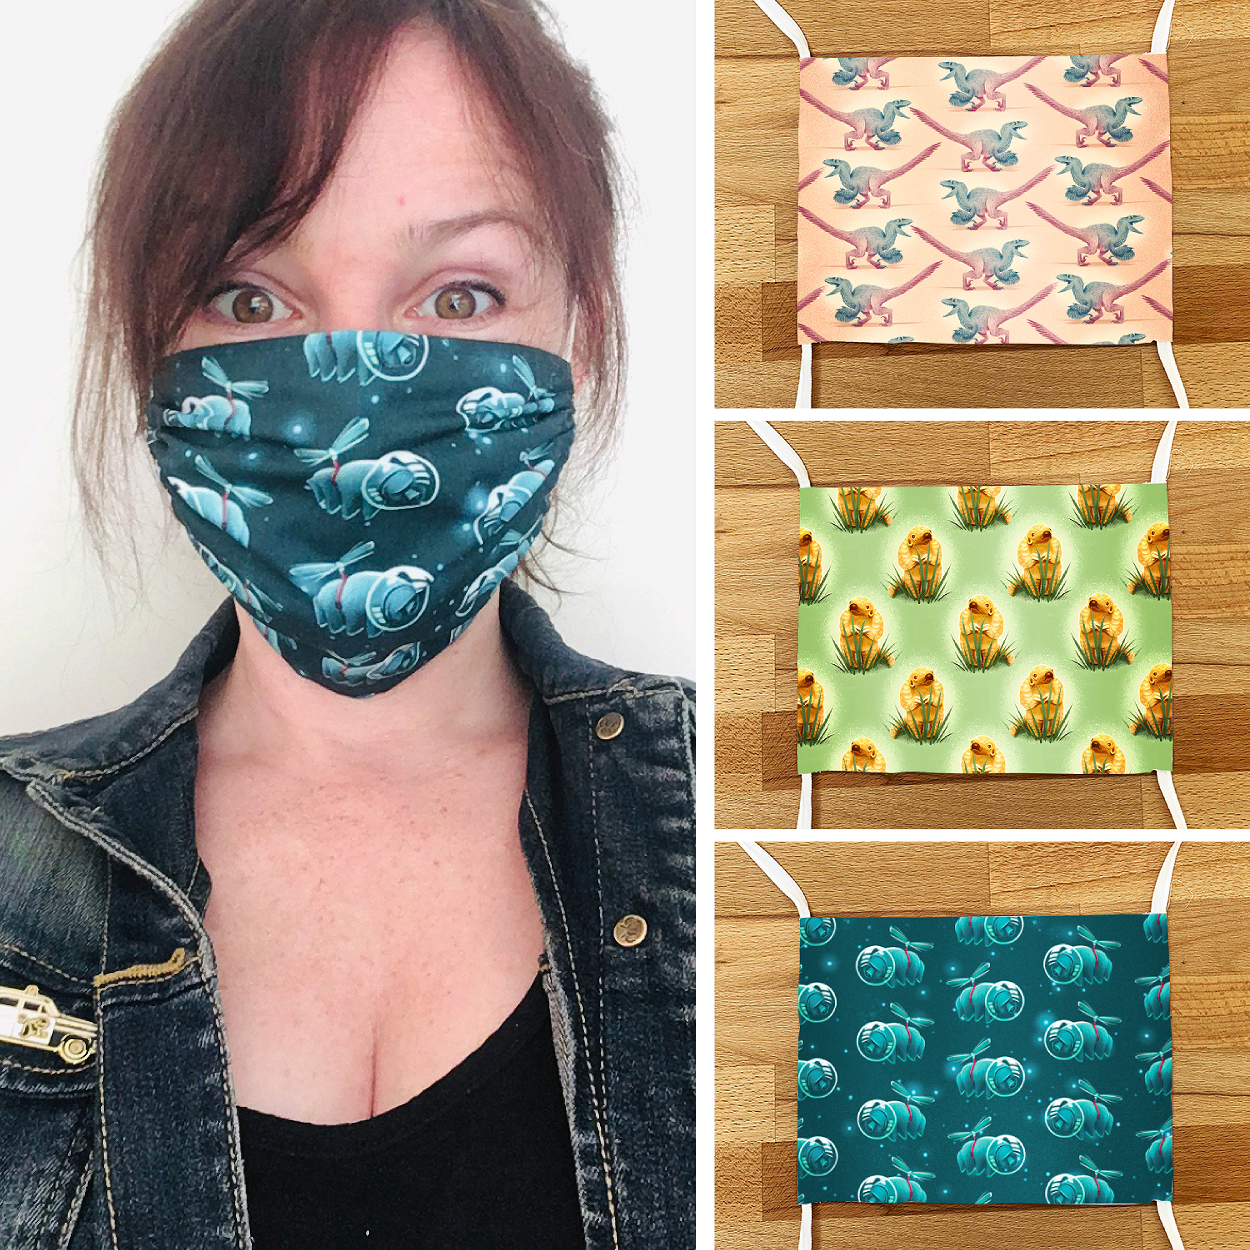 Interview with Poodlesoup about our geeky mouth masks